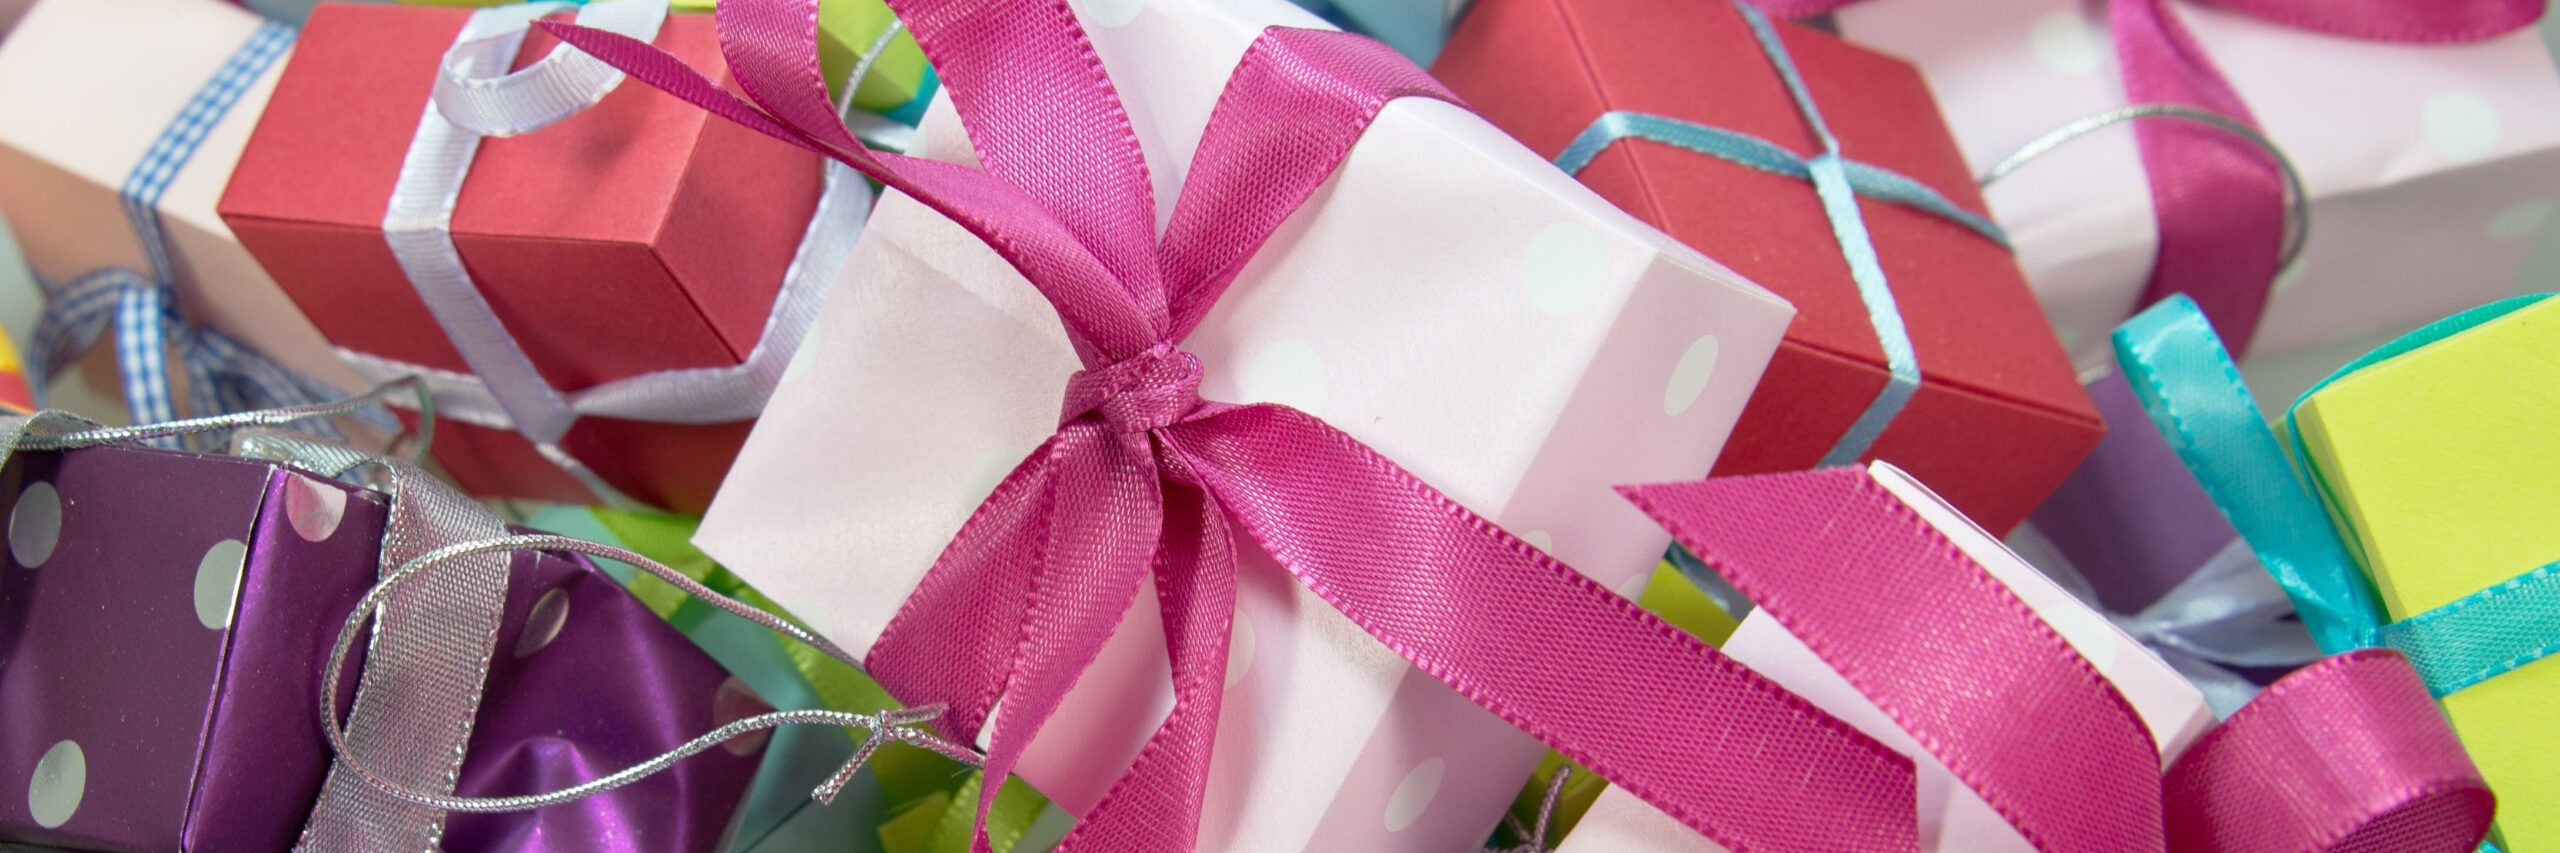 assortment of wrapped gifts banner